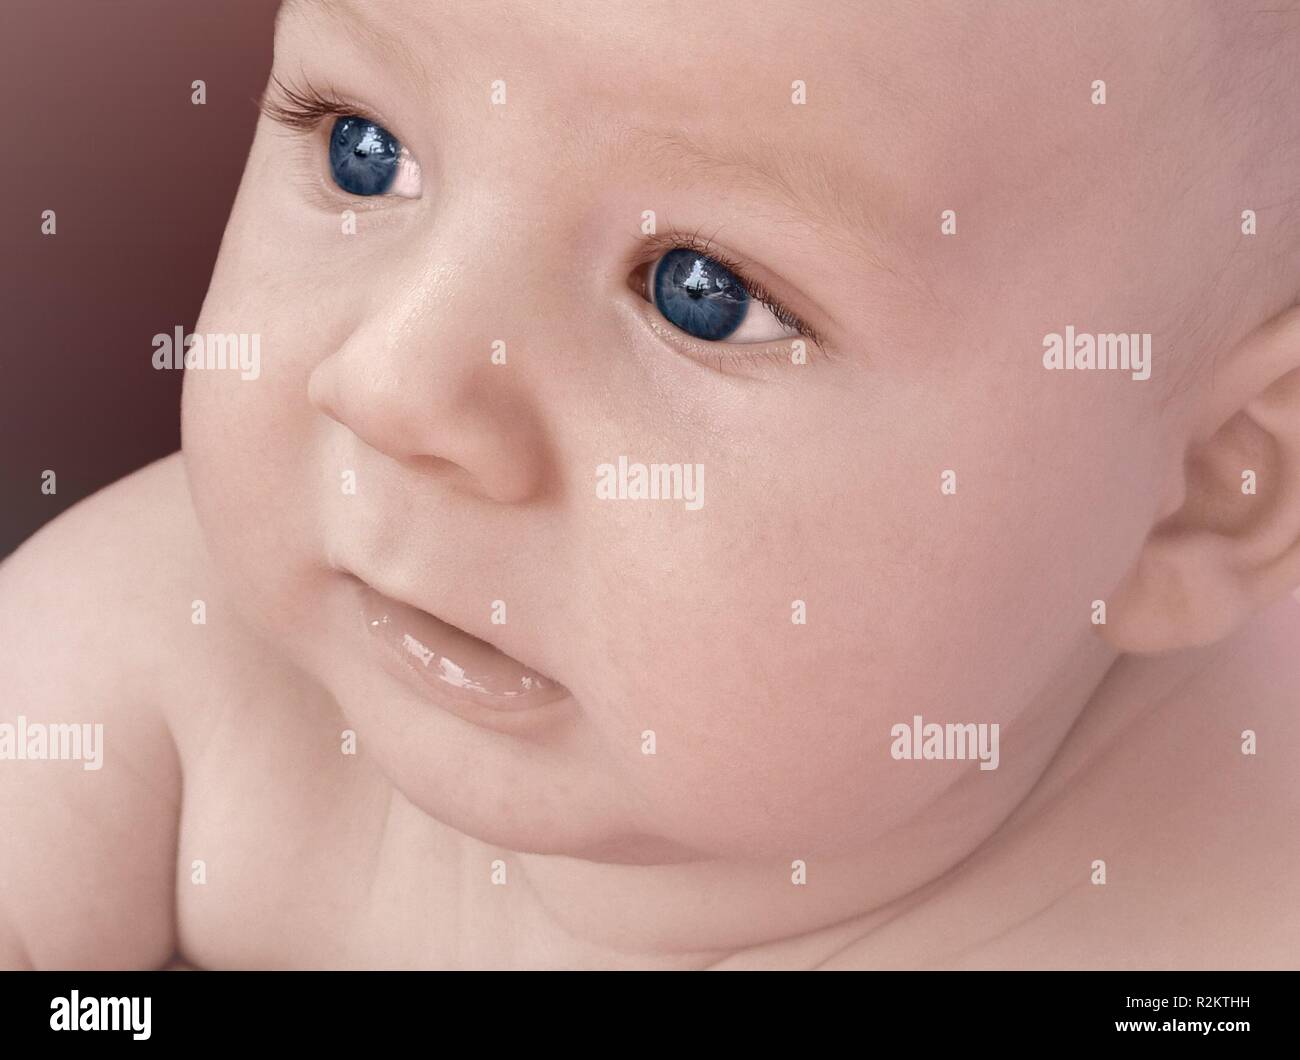 the view of a baby Stock Photo